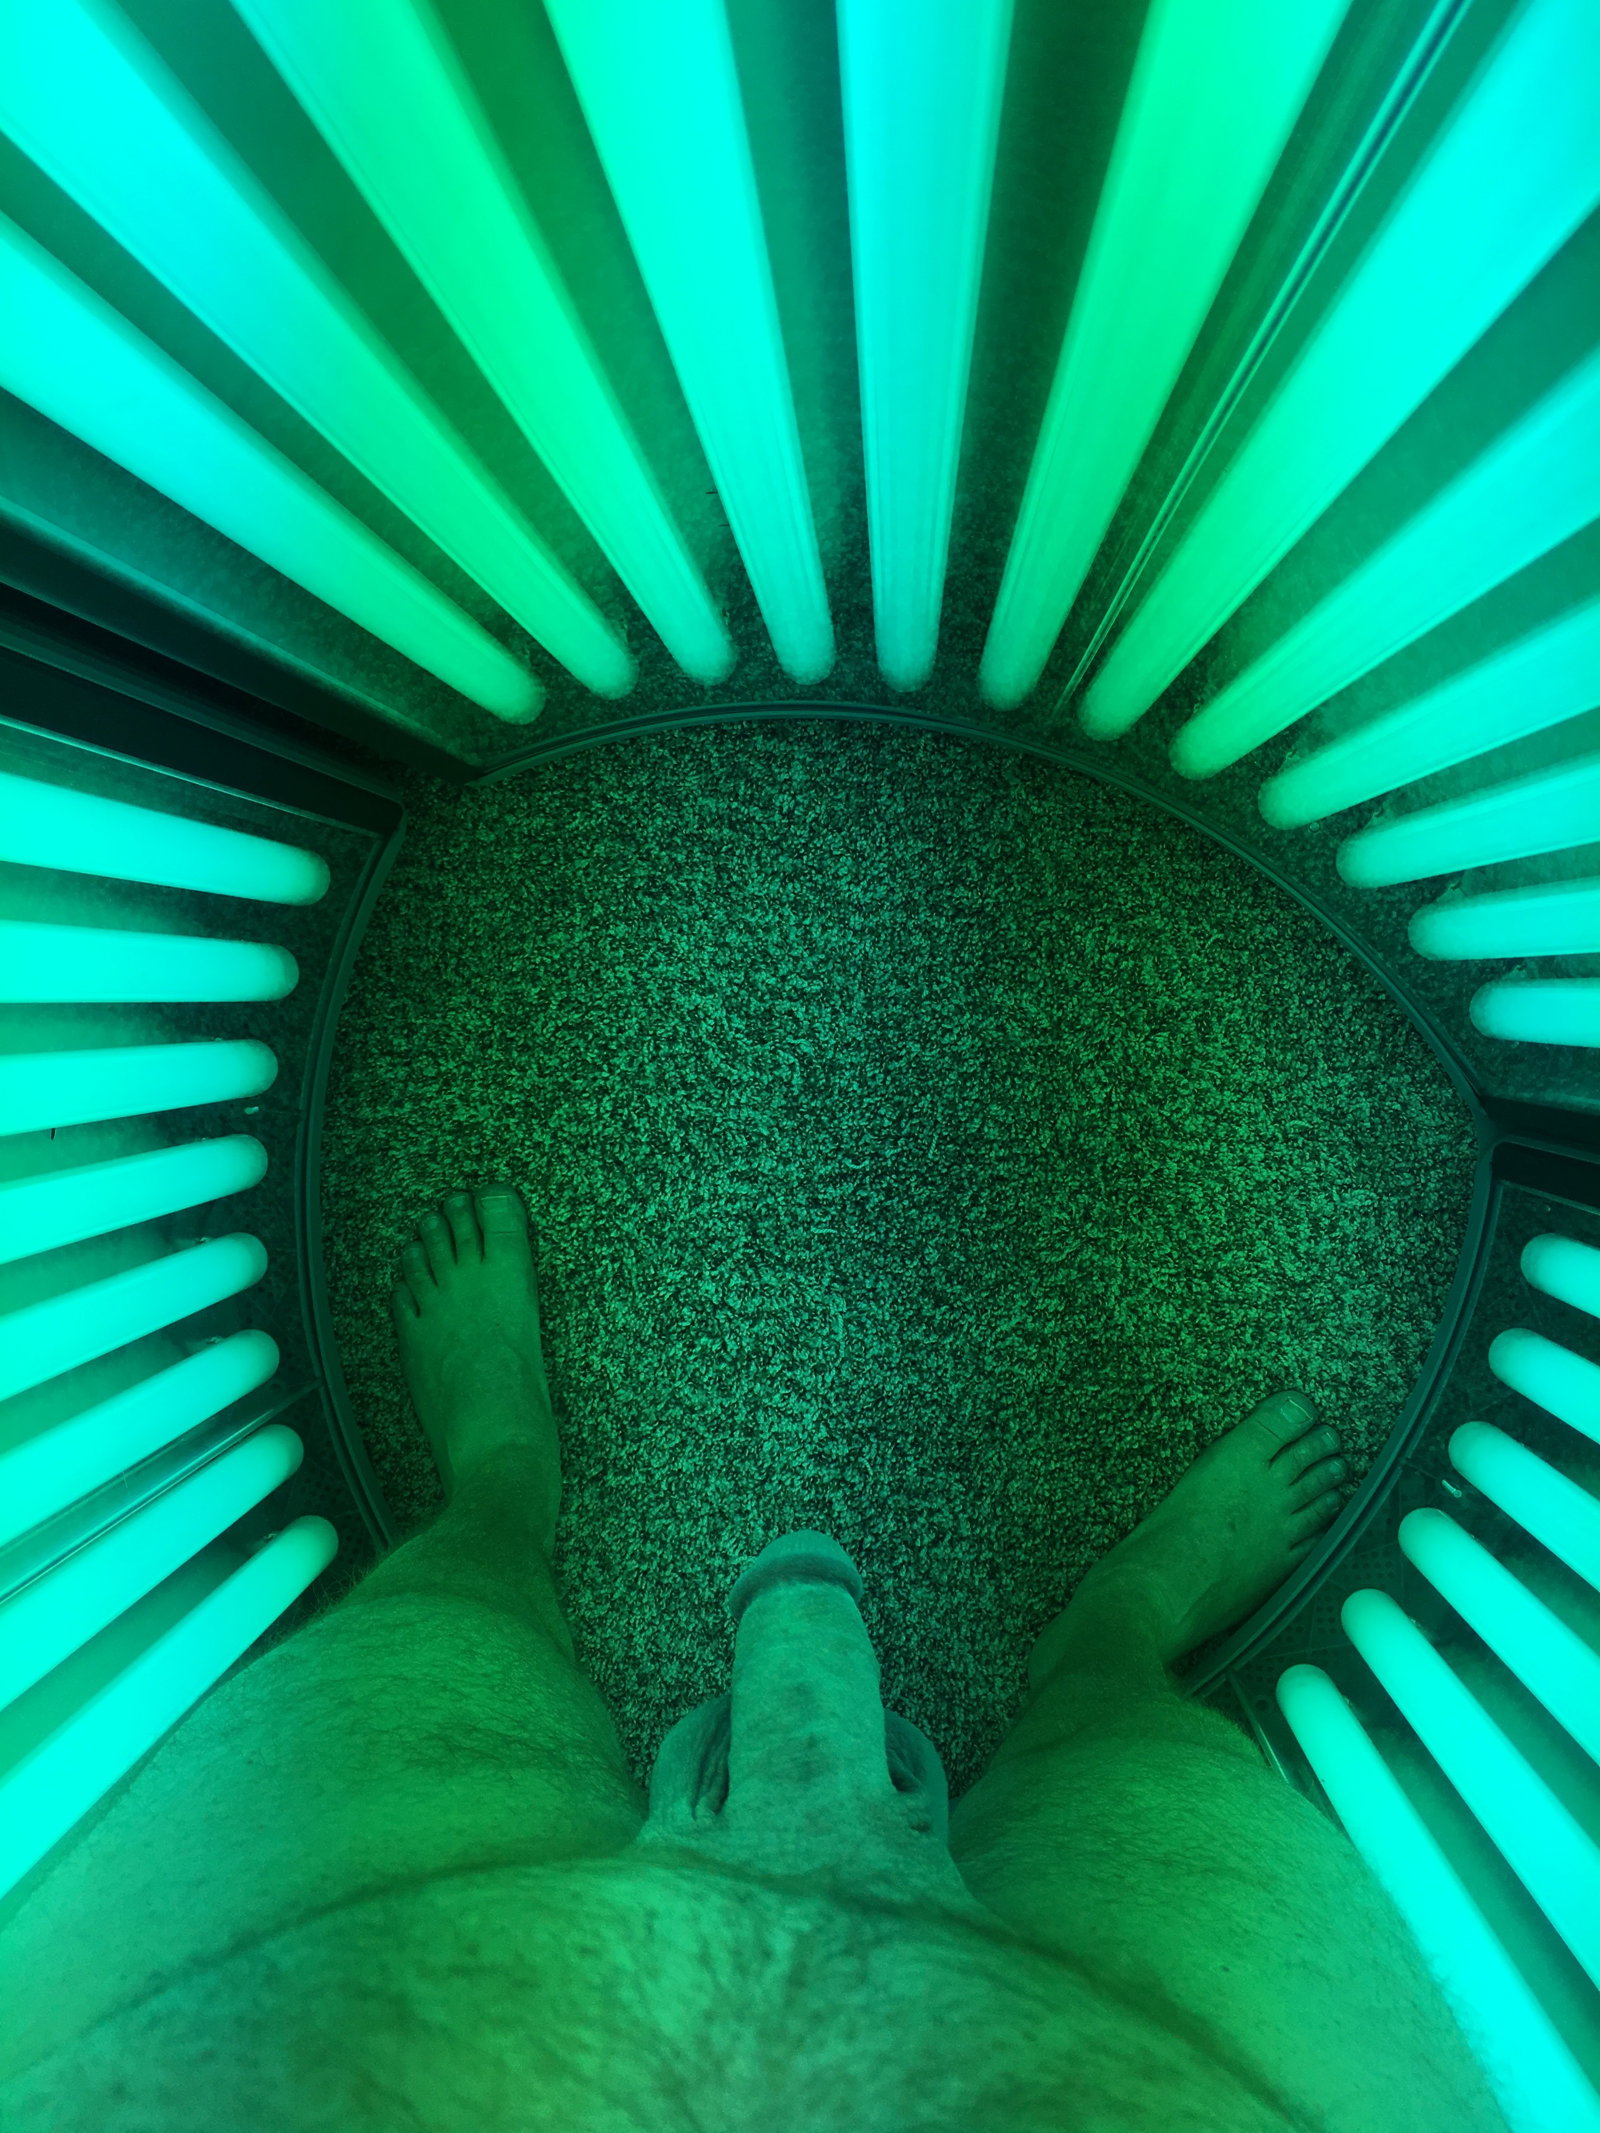 Photo by justforfun870 with the username @justforfun870, who is a verified user,  June 24, 2019 at 4:08 AM. The post is about the topic Tan Lines Are Beautiful and the text says 'Finally got time for the tanning bed!'